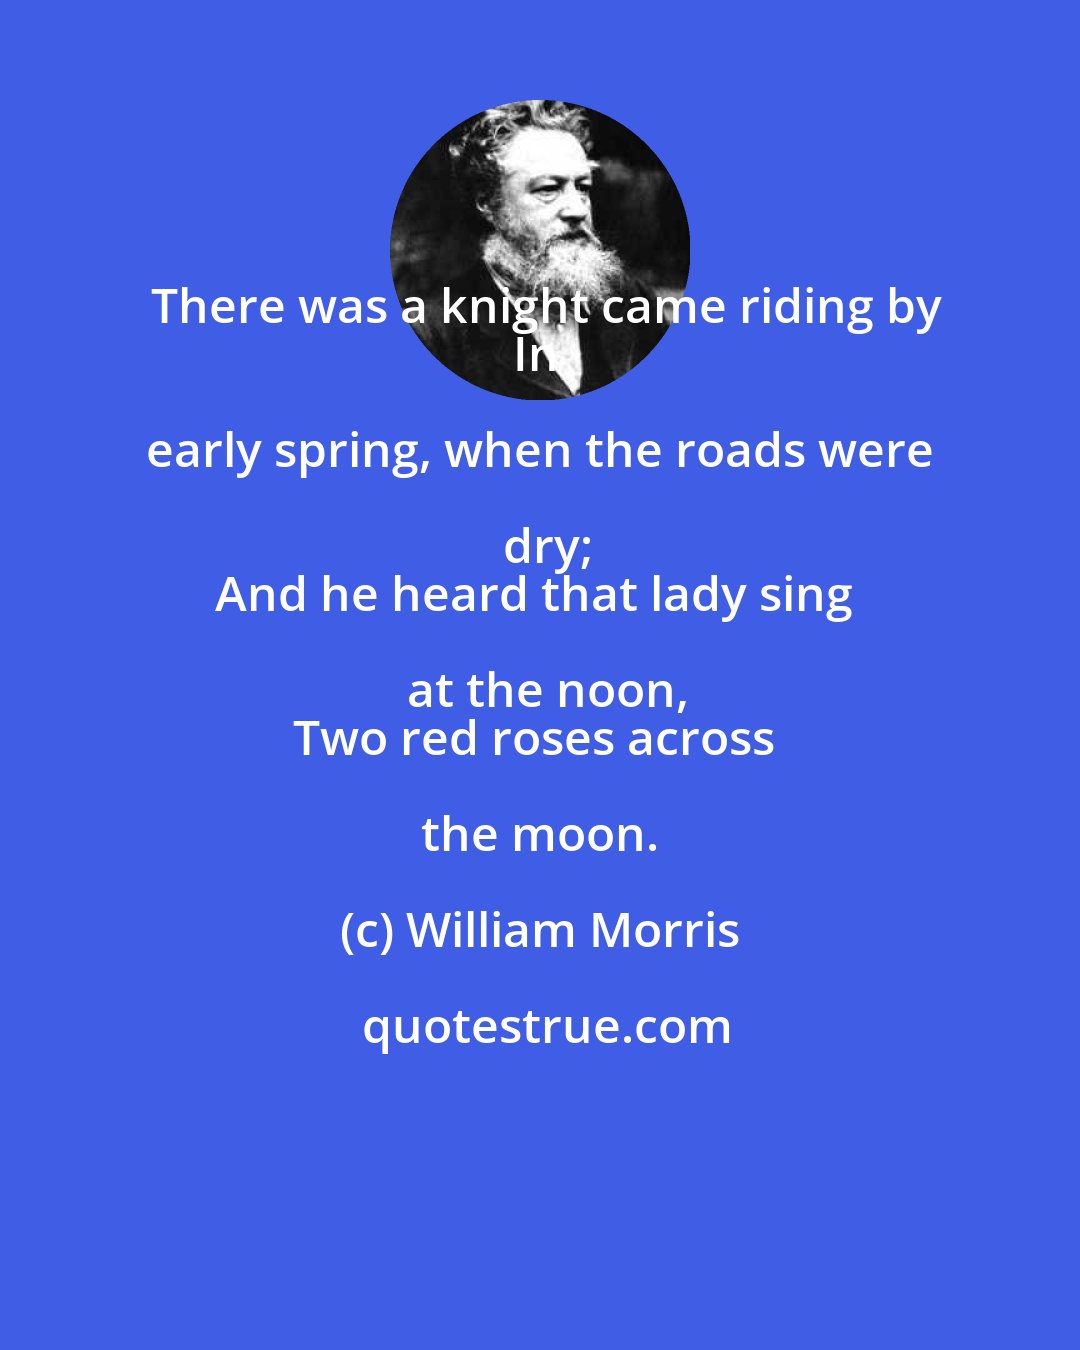 William Morris: There was a knight came riding by
In early spring, when the roads were dry;
And he heard that lady sing at the noon,
Two red roses across the moon.